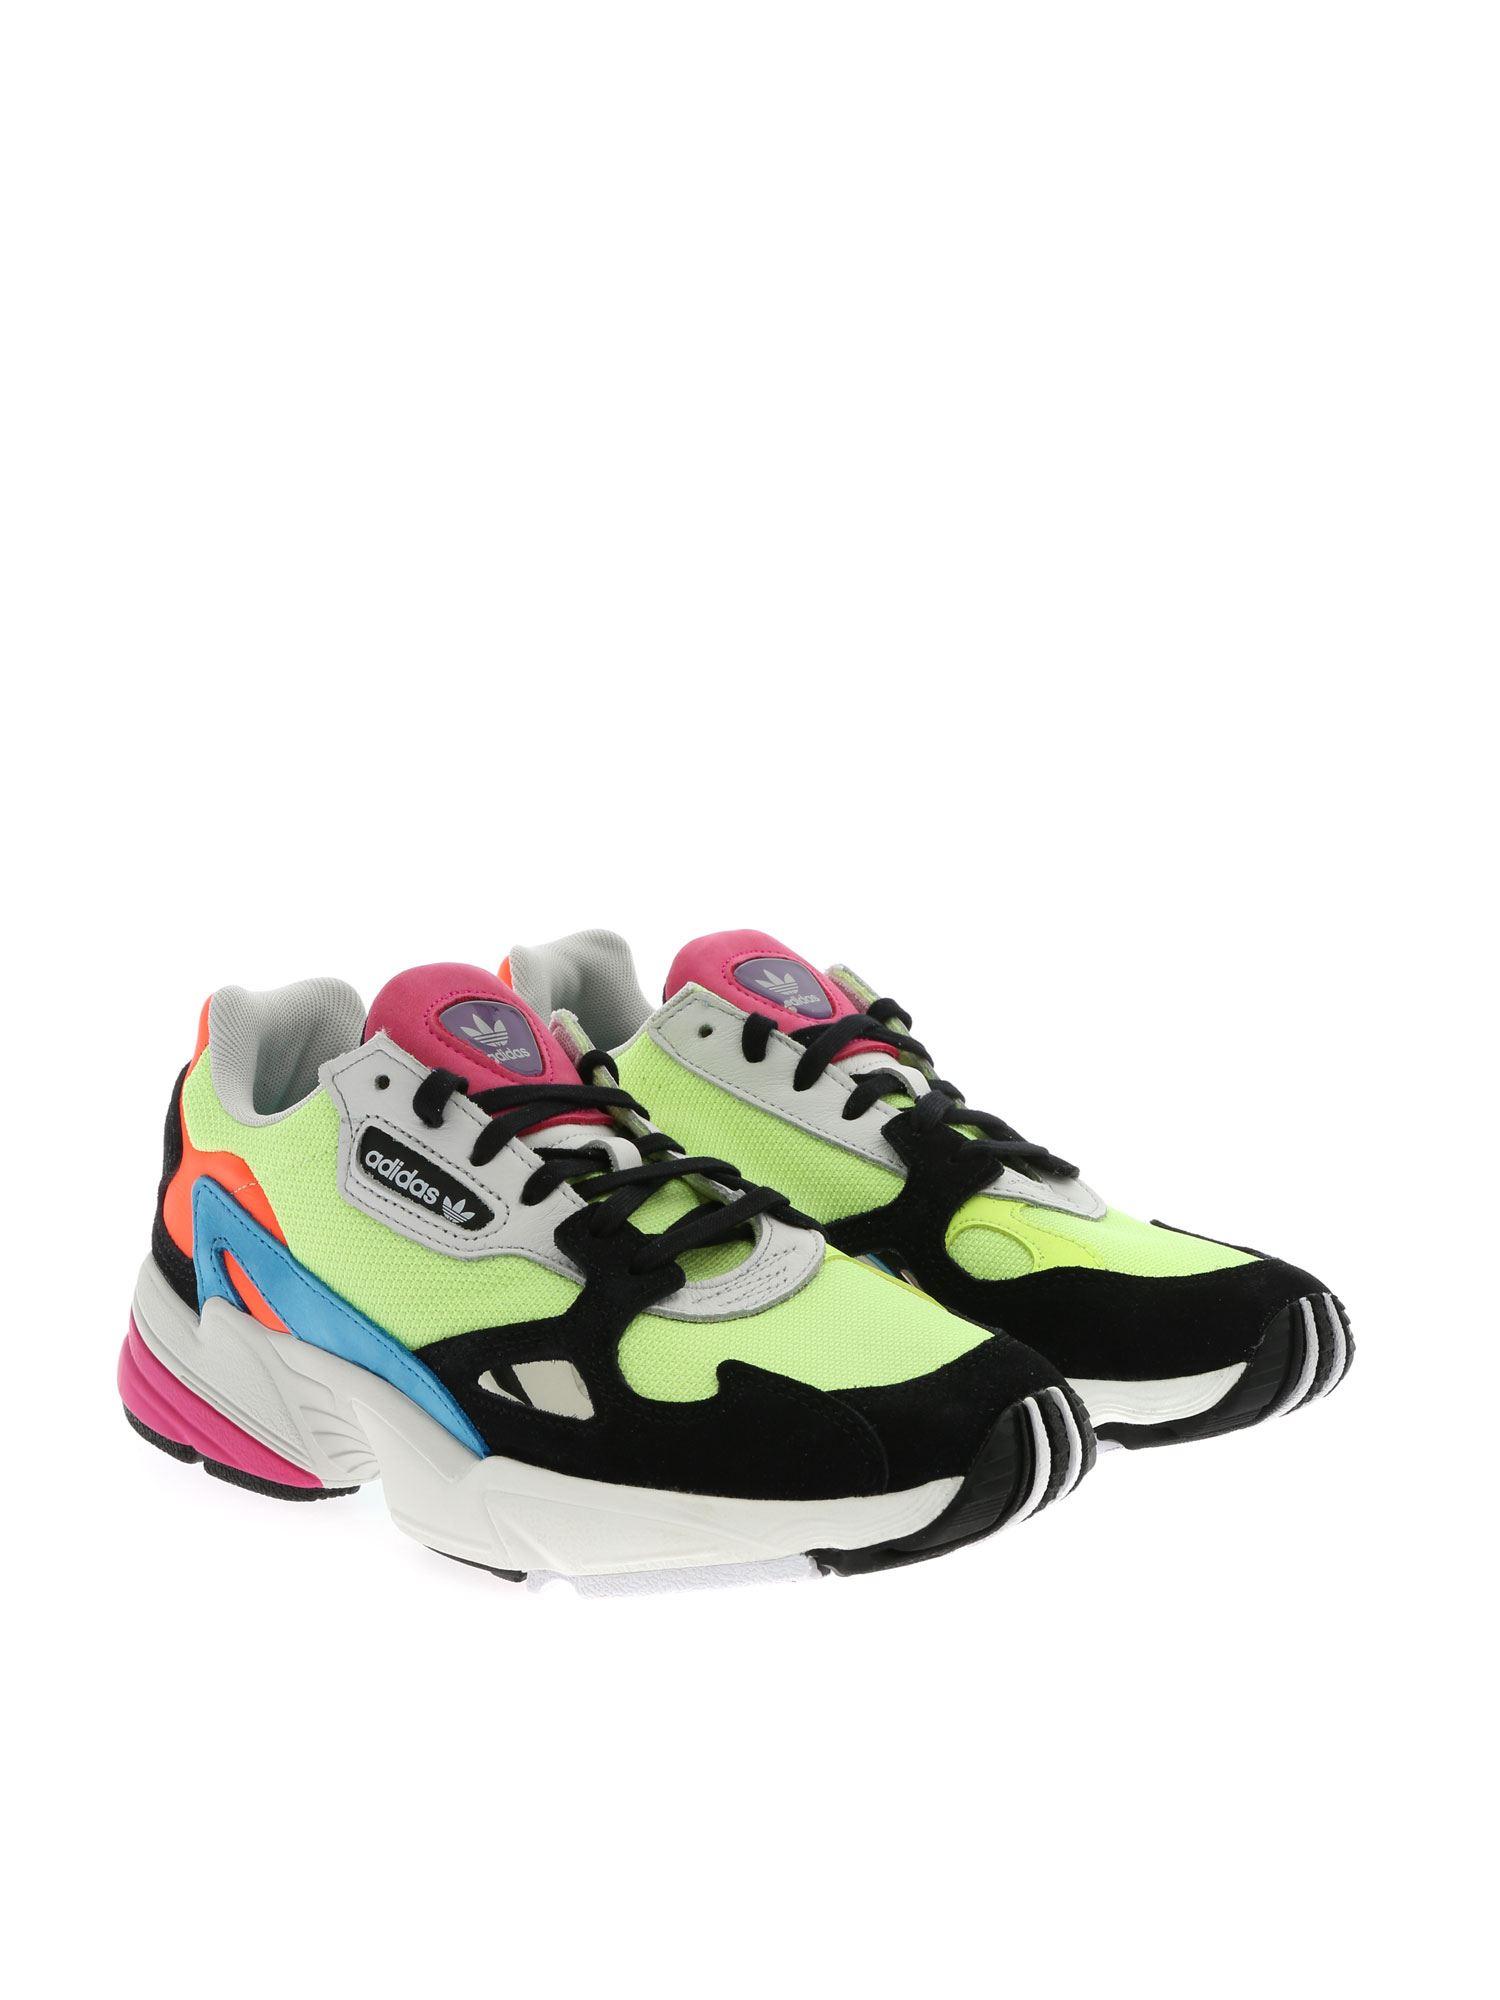 adidas Leather Falcon W Sneakers In Fluo Yellow - Lyst